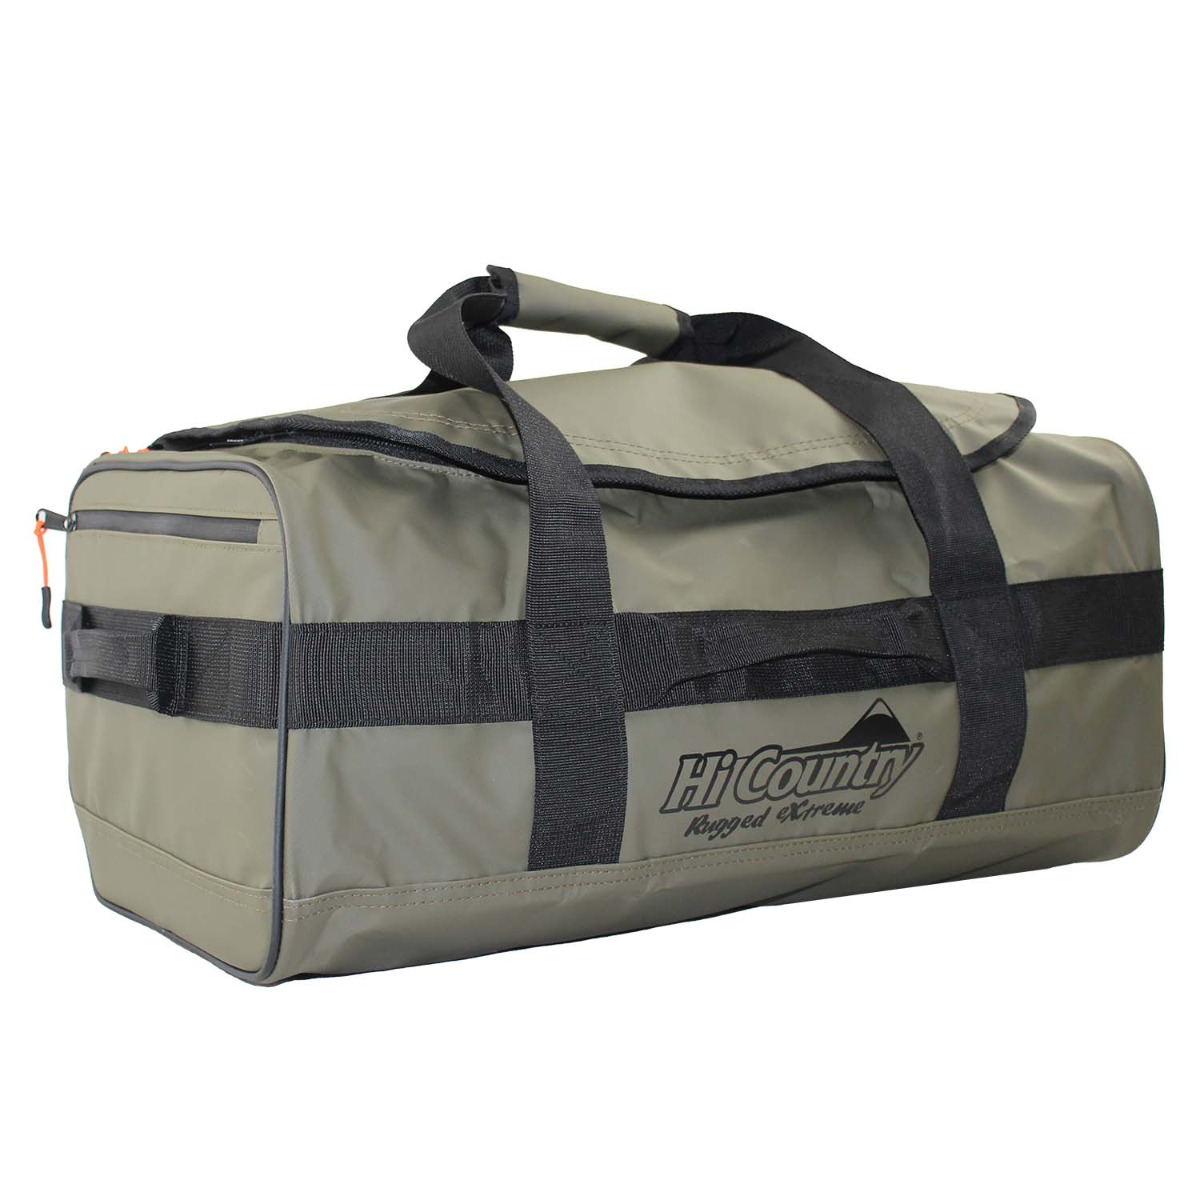 HI-COUNTRY RUGGED EXTREME 60LT GEAR BAG